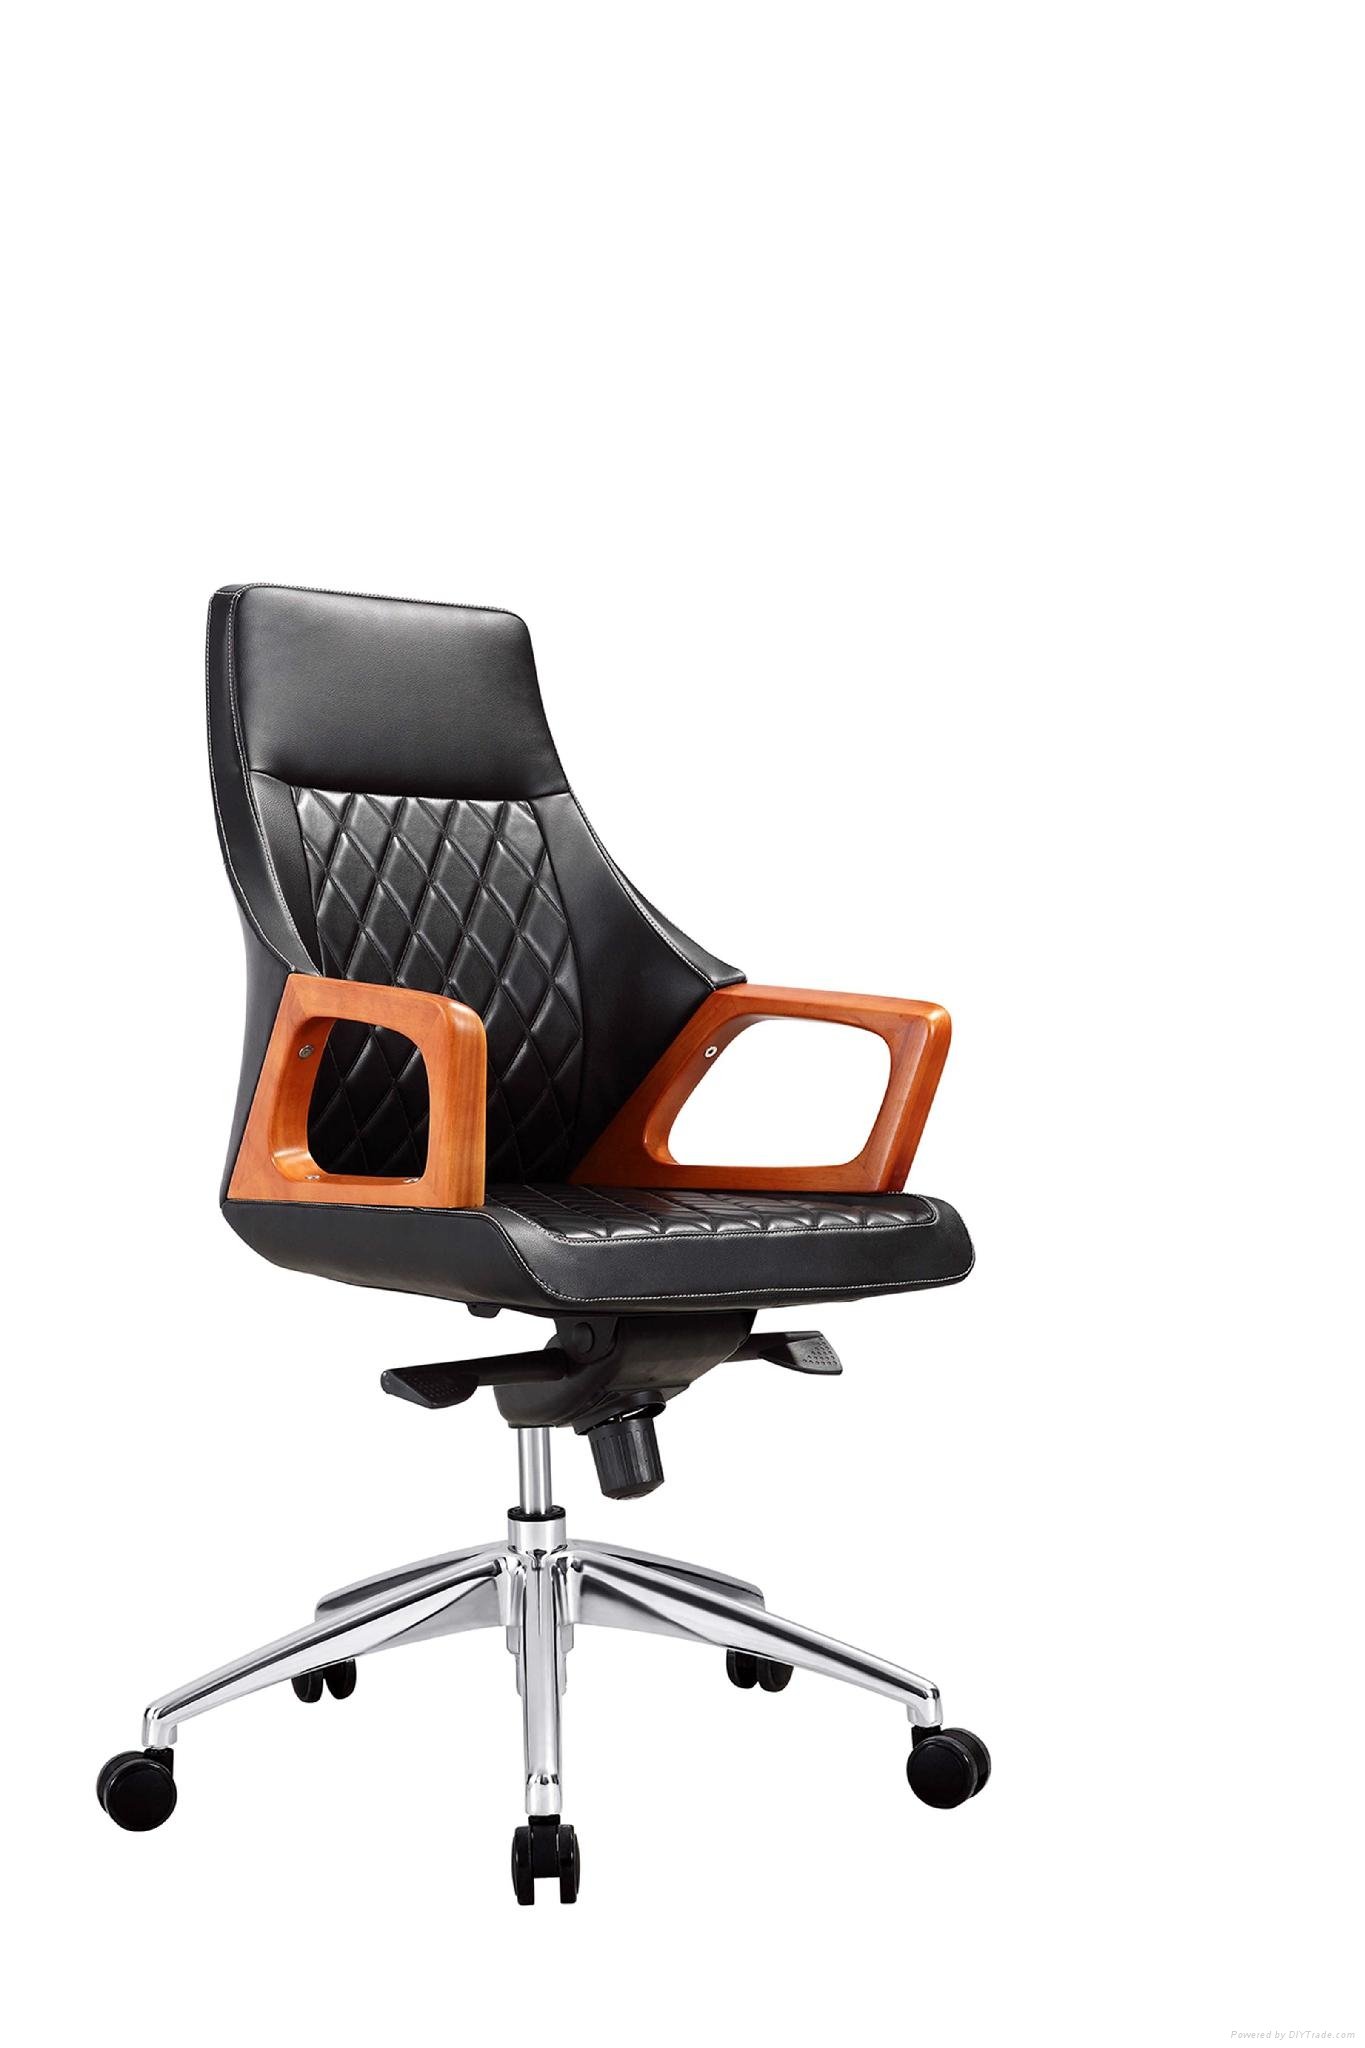 luxury office chair  with wheels